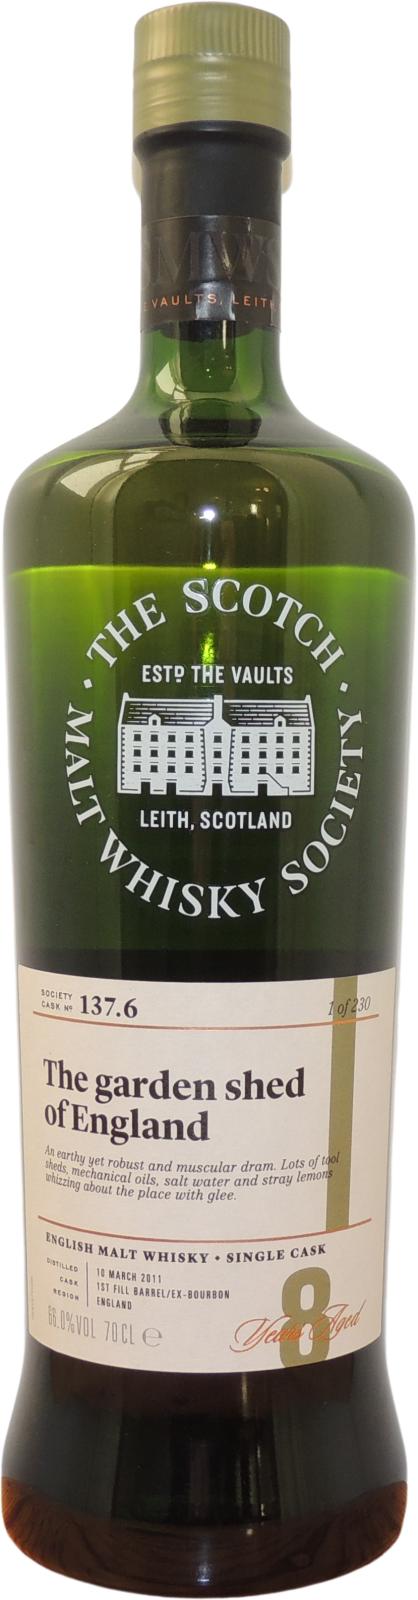 The English Whisky 2011 SMWS 137.6